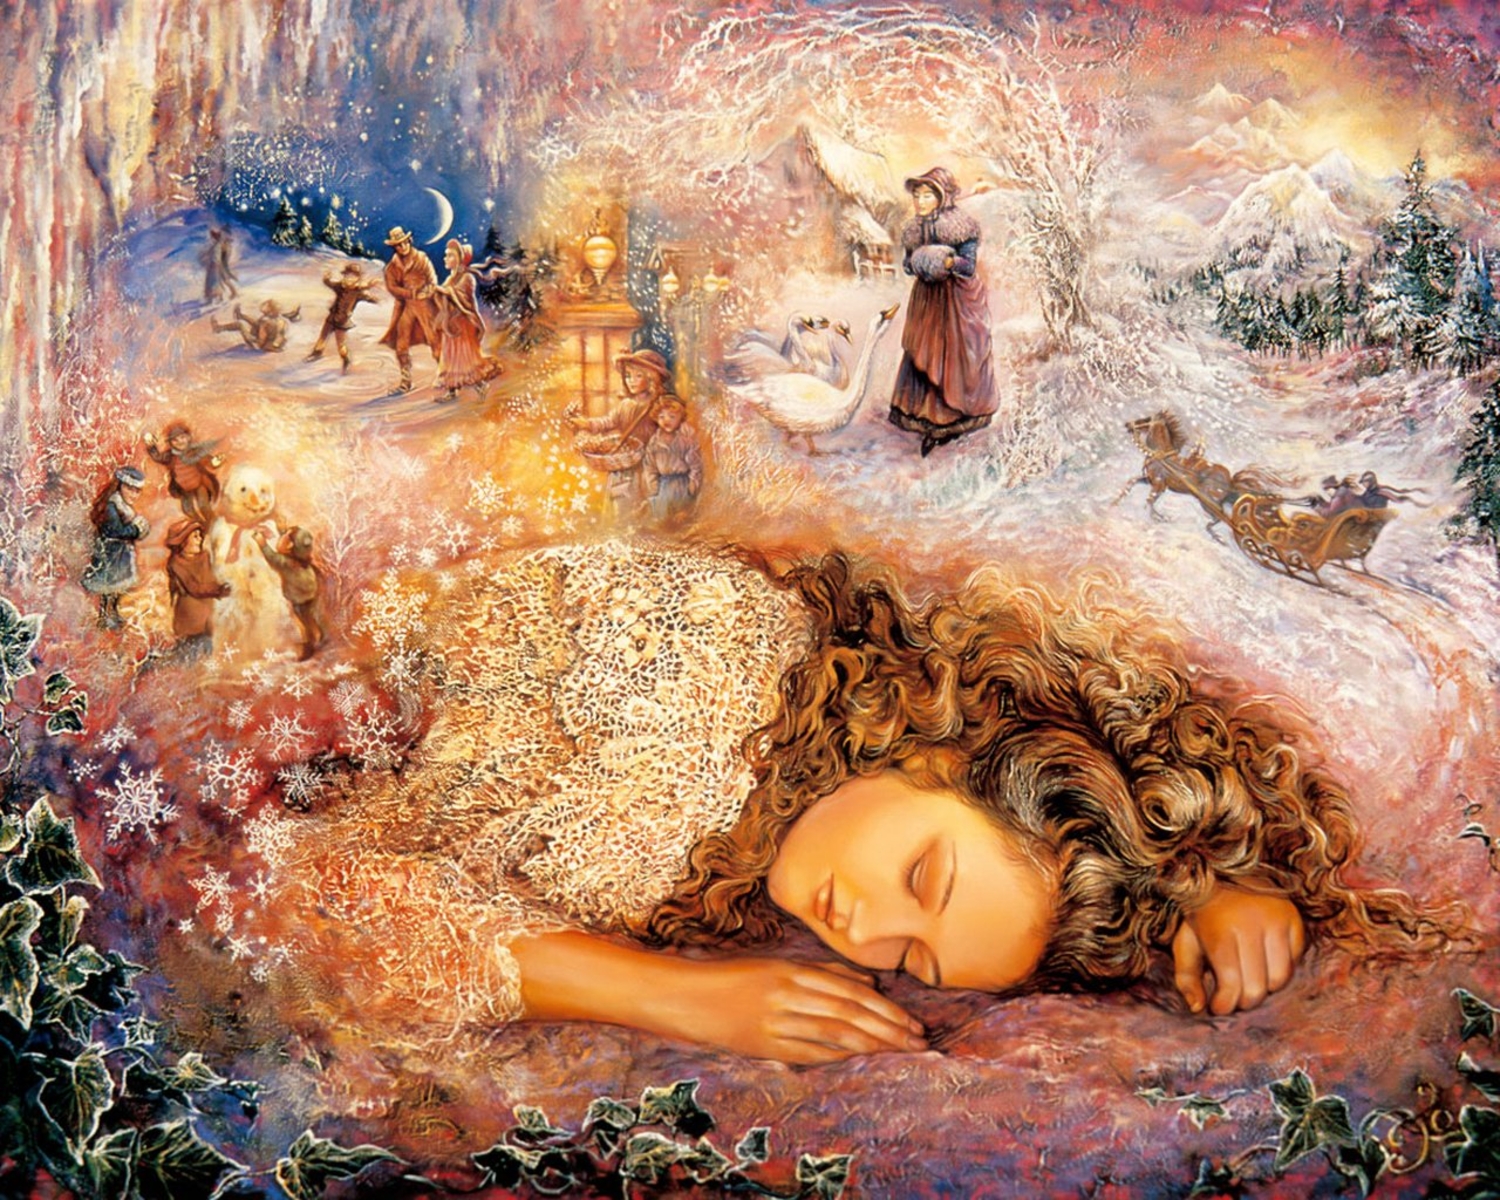 Mystical Fantasy Paintings Kb Wall Josephine Winter Dreaming